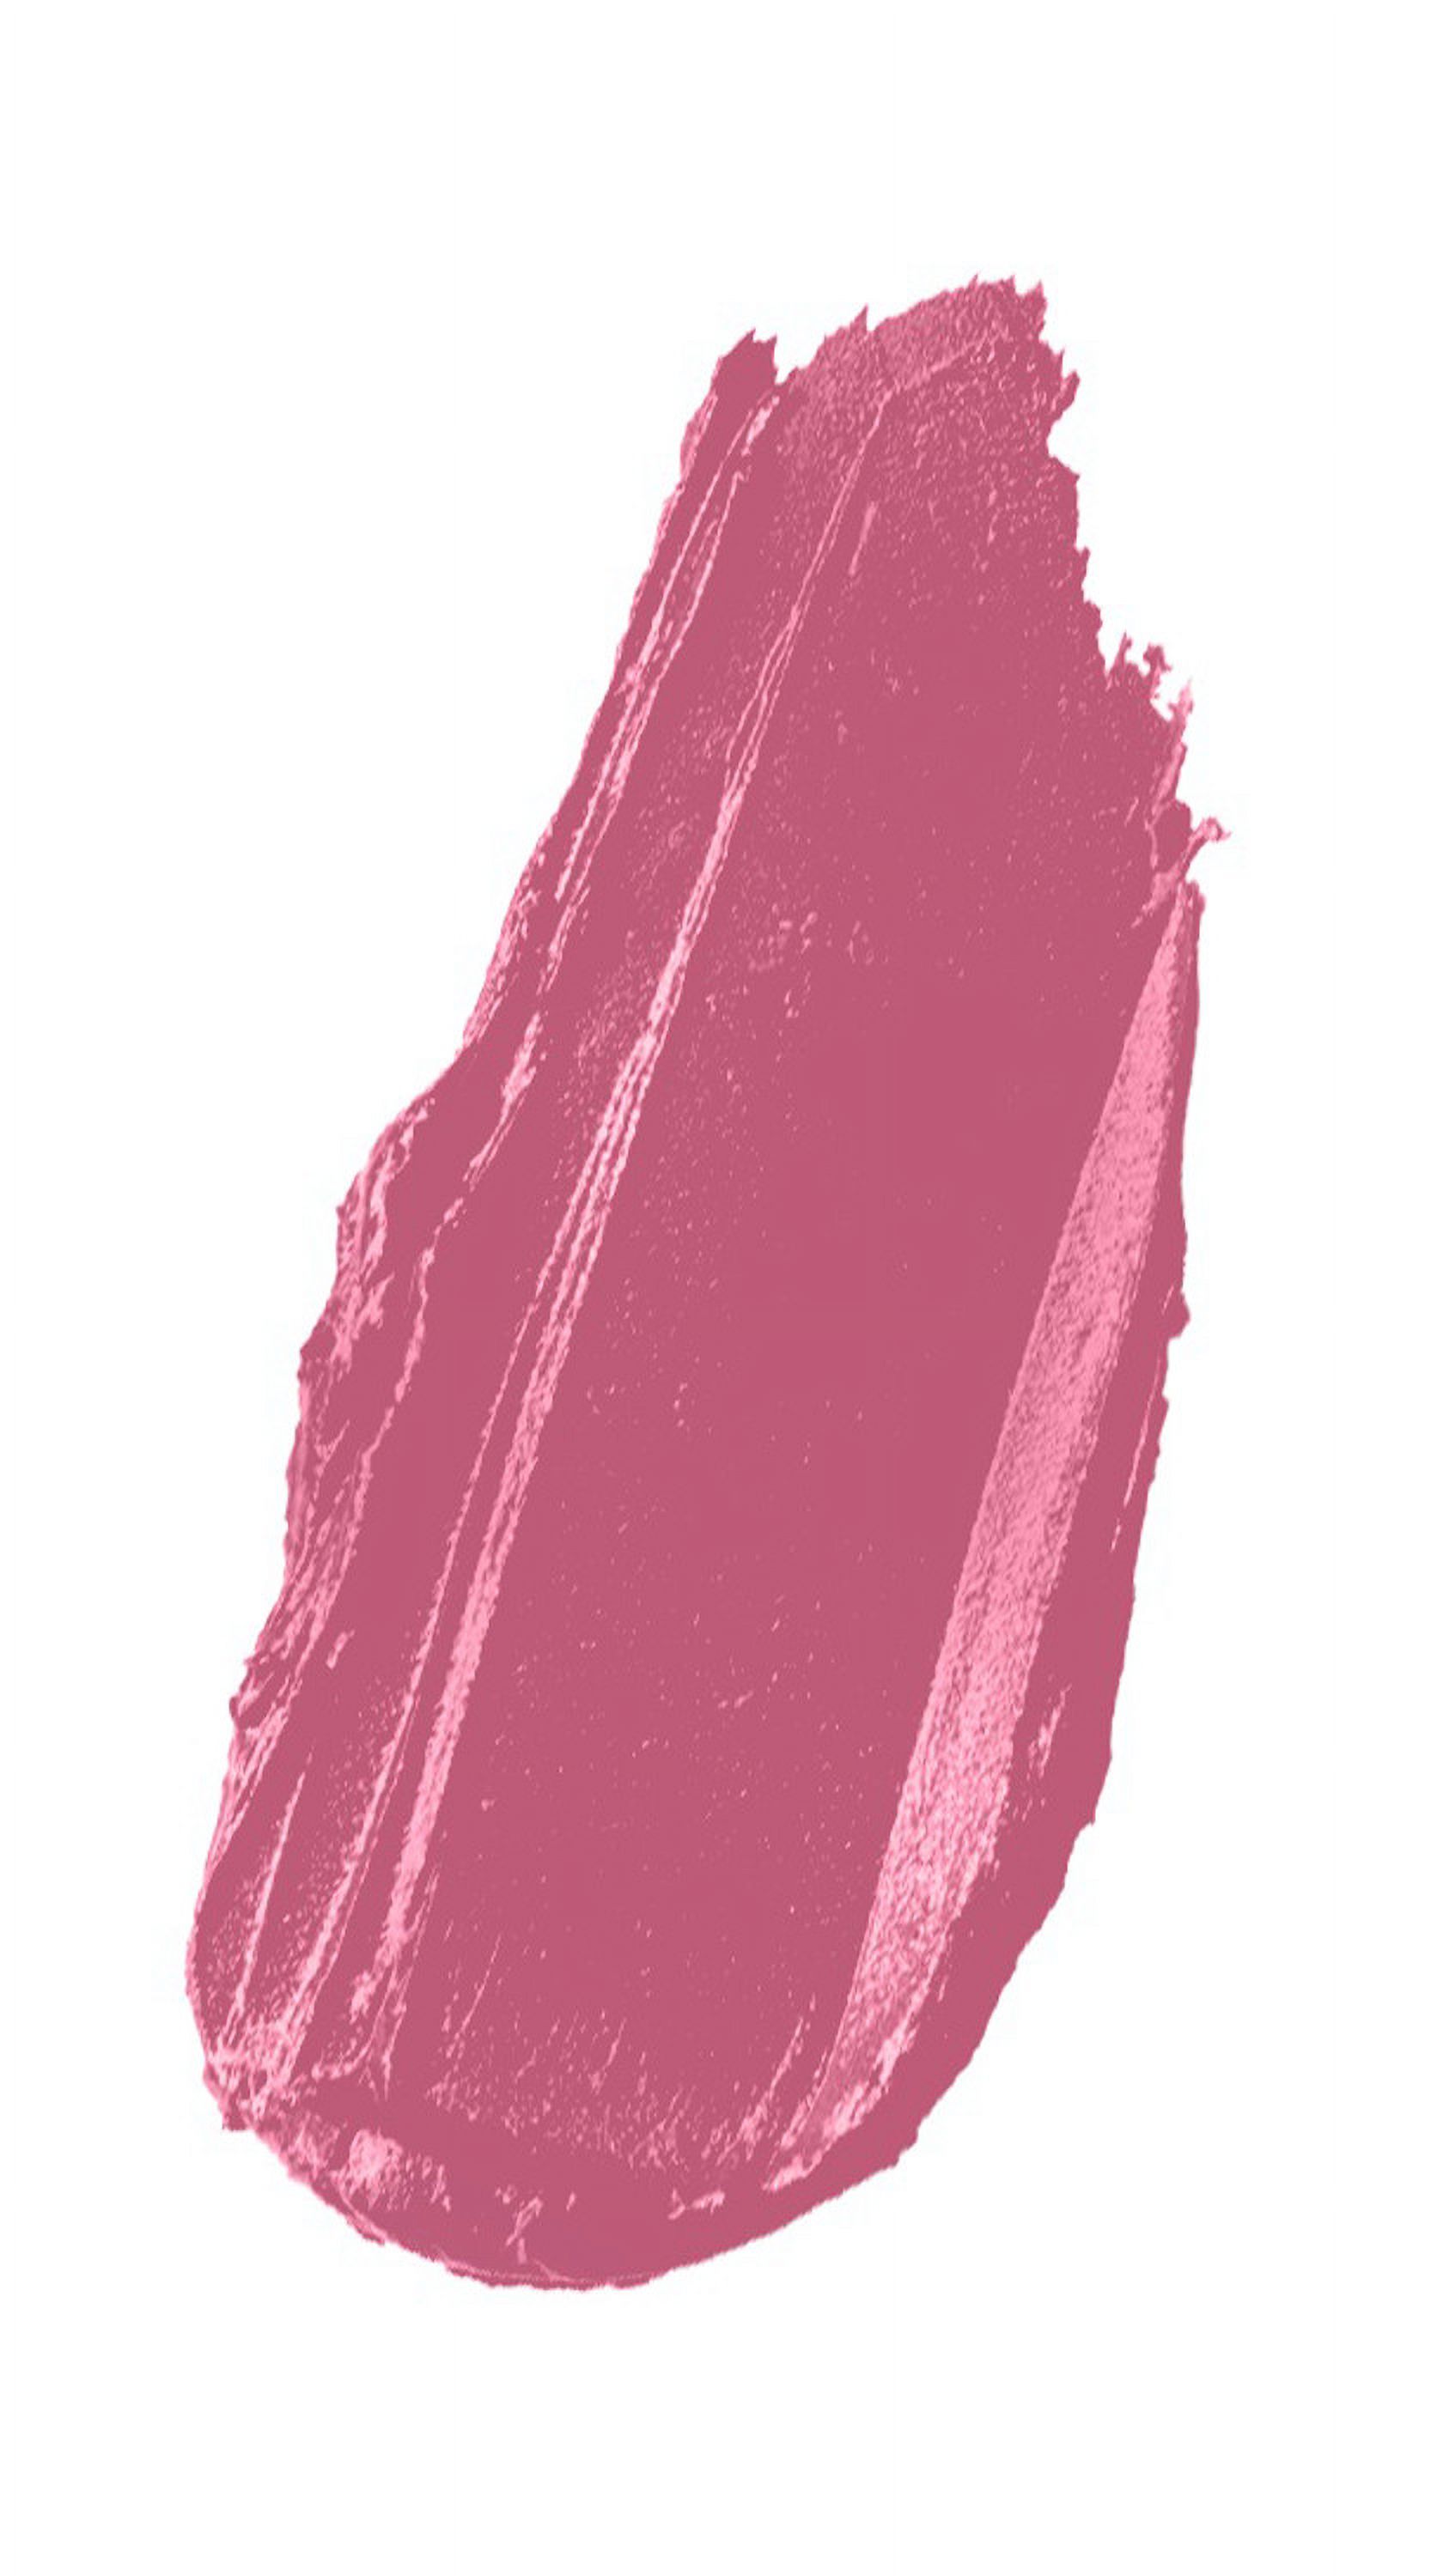 wet n wild Silk Finish Lipstick - Will You Be With Me? - Will You Be With Me? - image 2 of 3